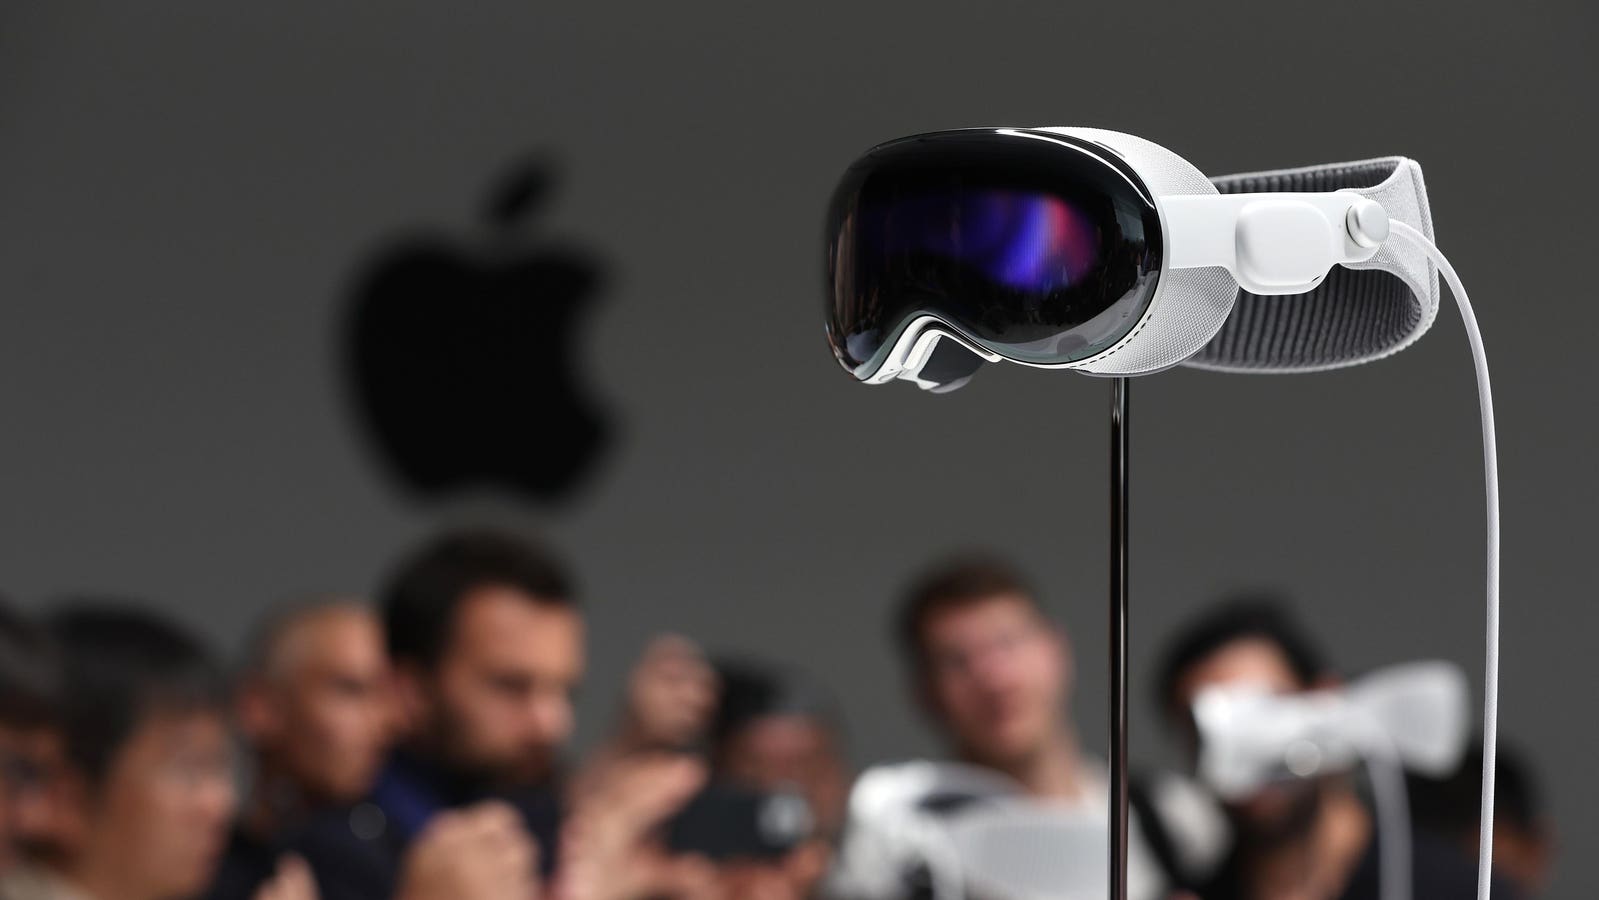 Apple is reportedly exploring mental health with its $3,500 Vision Pro augmented reality headset.